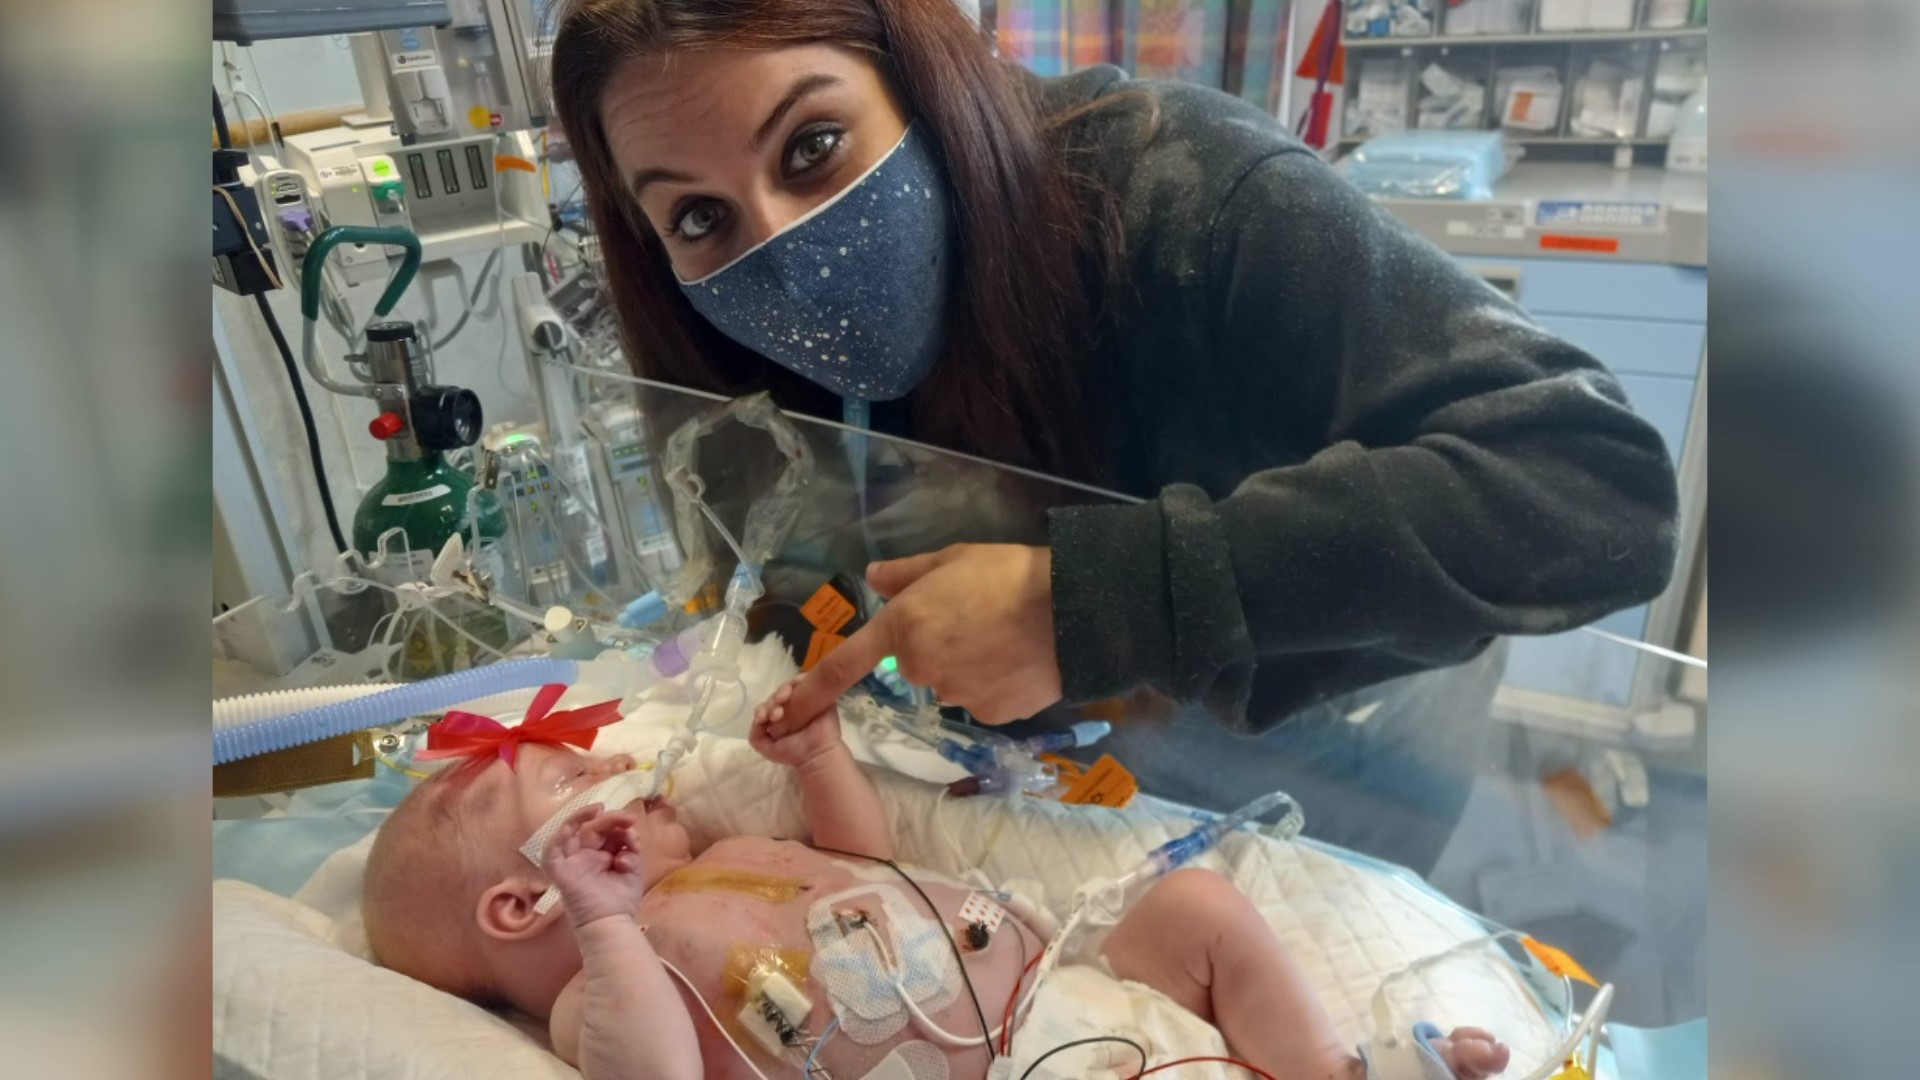 A family from Mount Carmel is facing serious obstacles this holiday season as their baby named Aspen Faith is fighting for her life.